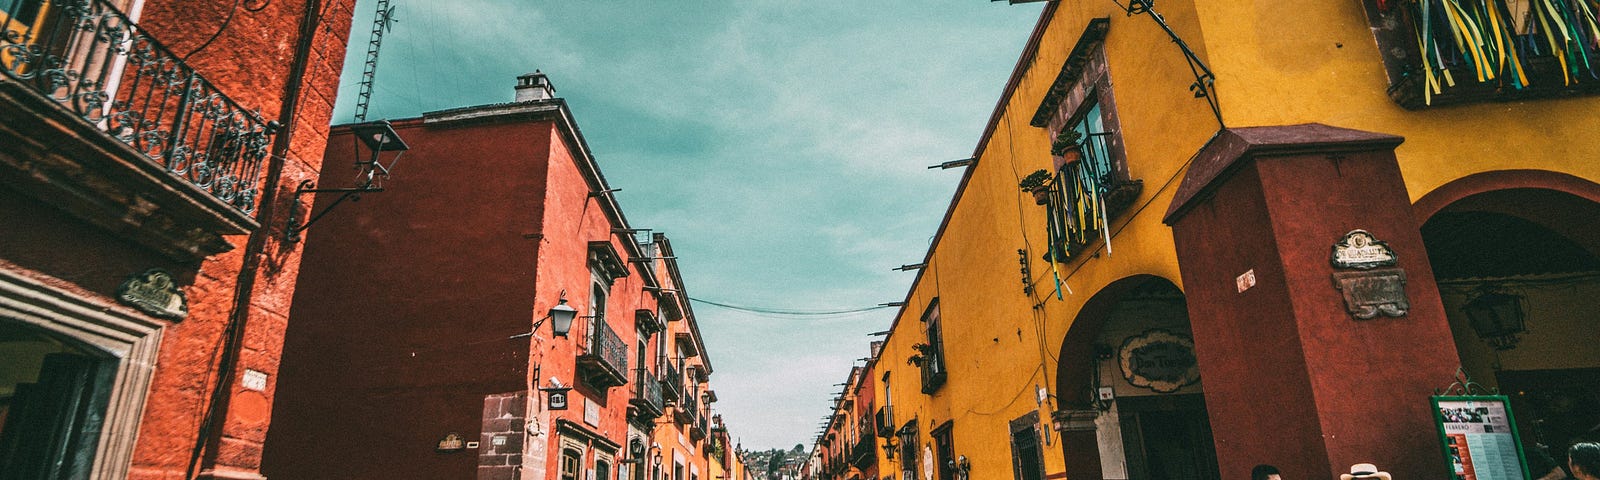 A view of a street in Mexico reminiscent of Mexico City’s Coyoacan neighborhood, featuring colonial buildings and brightly colored folkloric items.